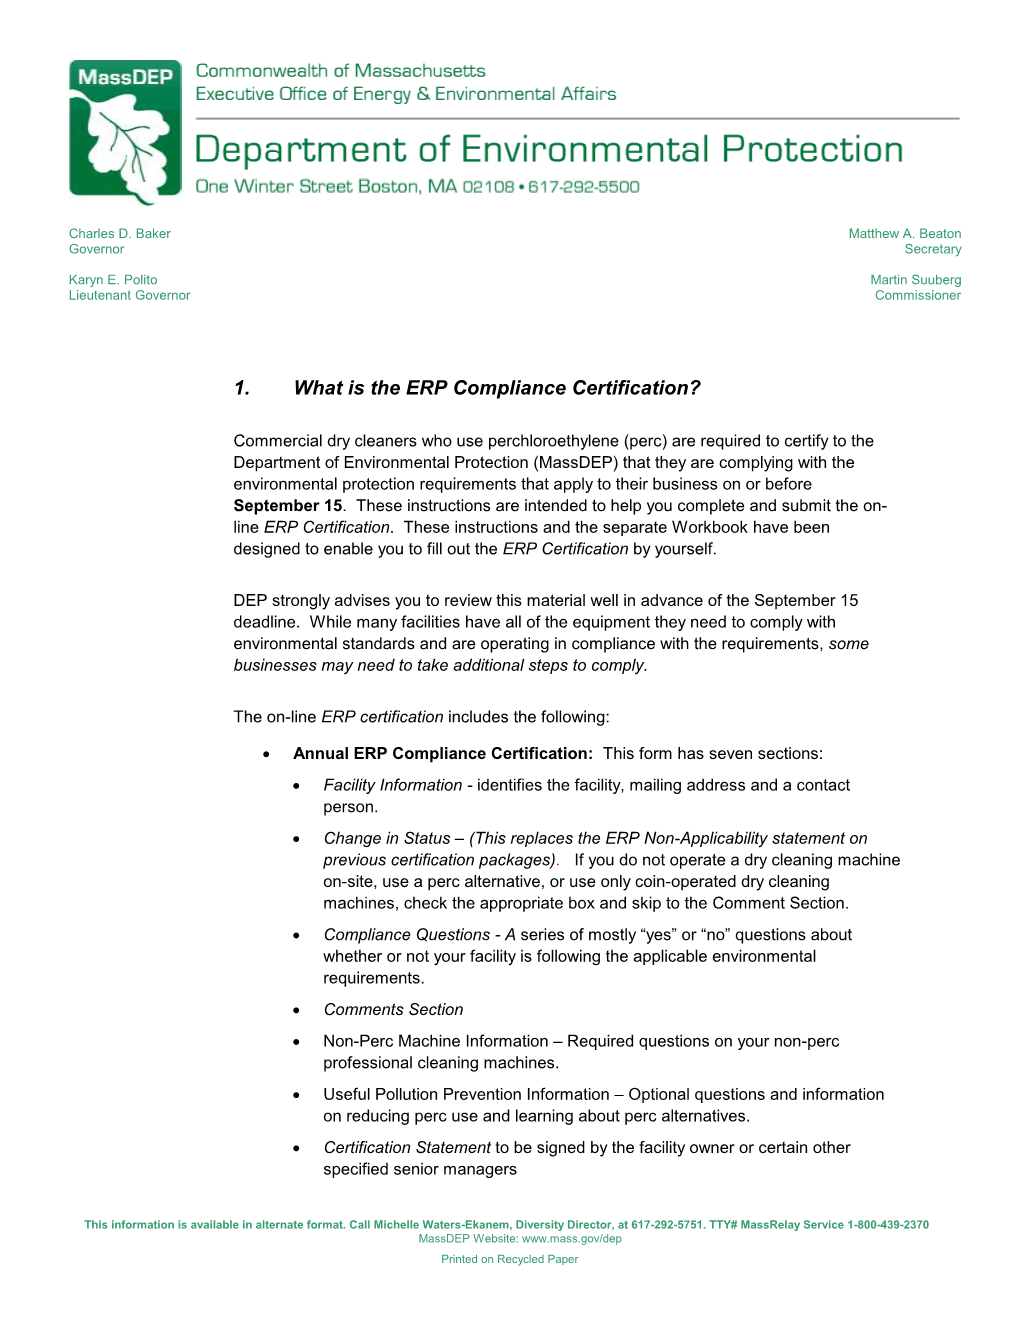 1. What Is the ERP Compliance Certification?